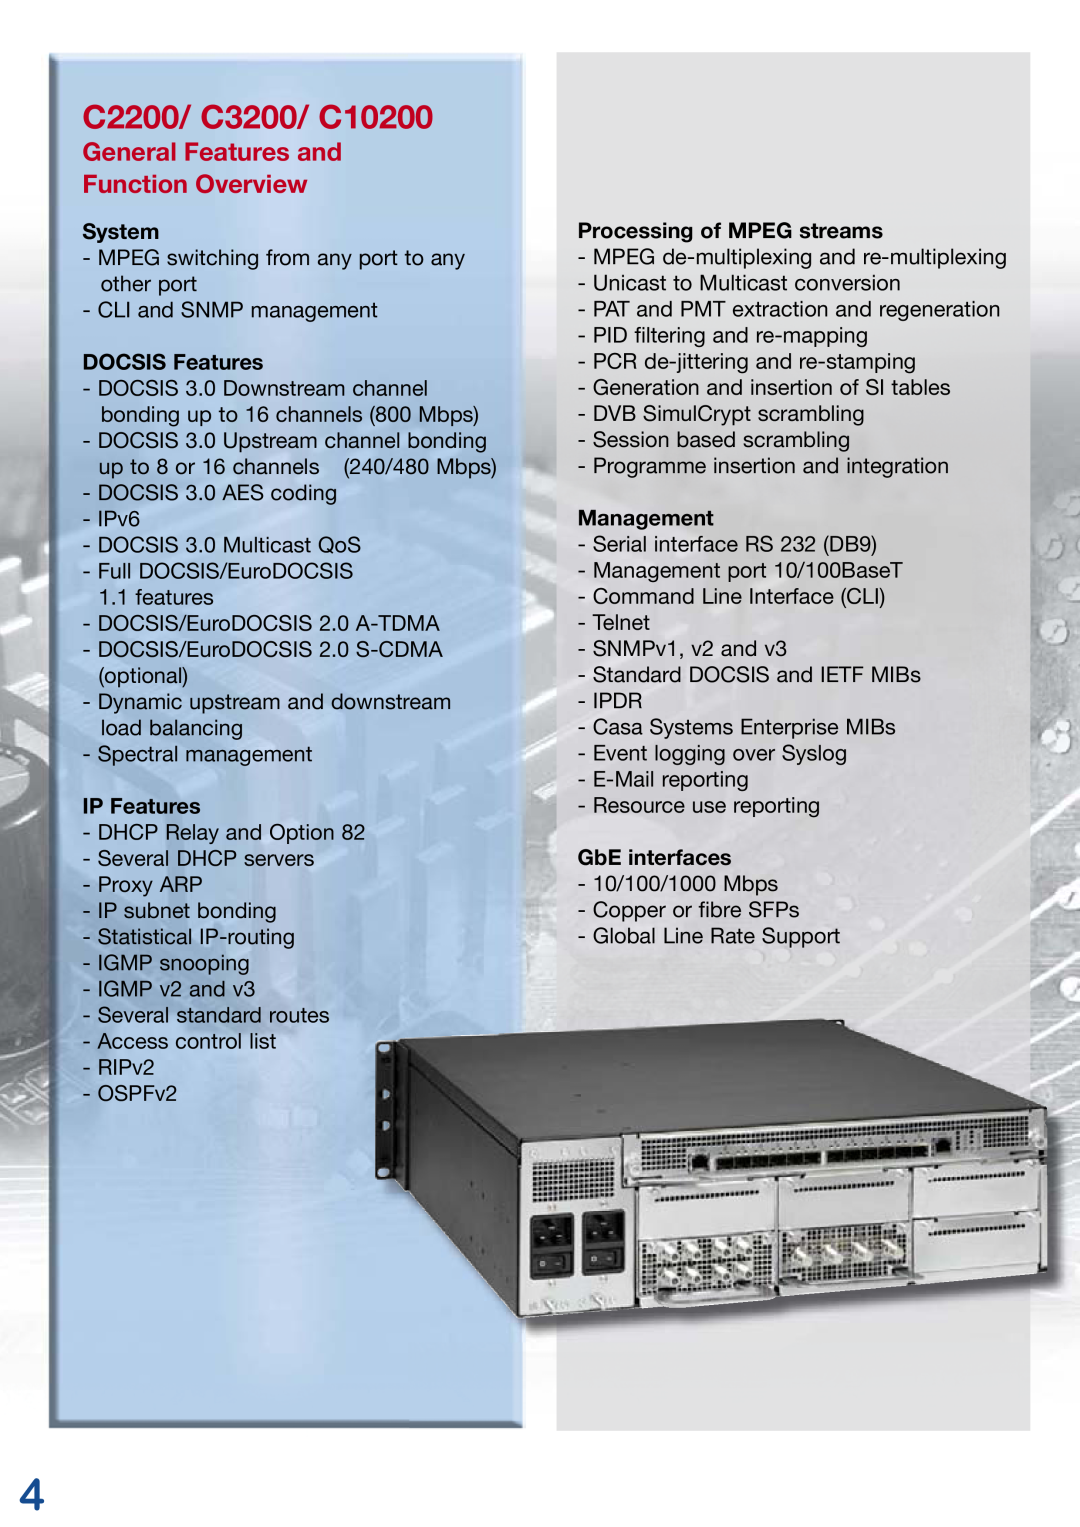 Kathrein manual C2200/ C3200/ C10200, General Features and Function Overview 